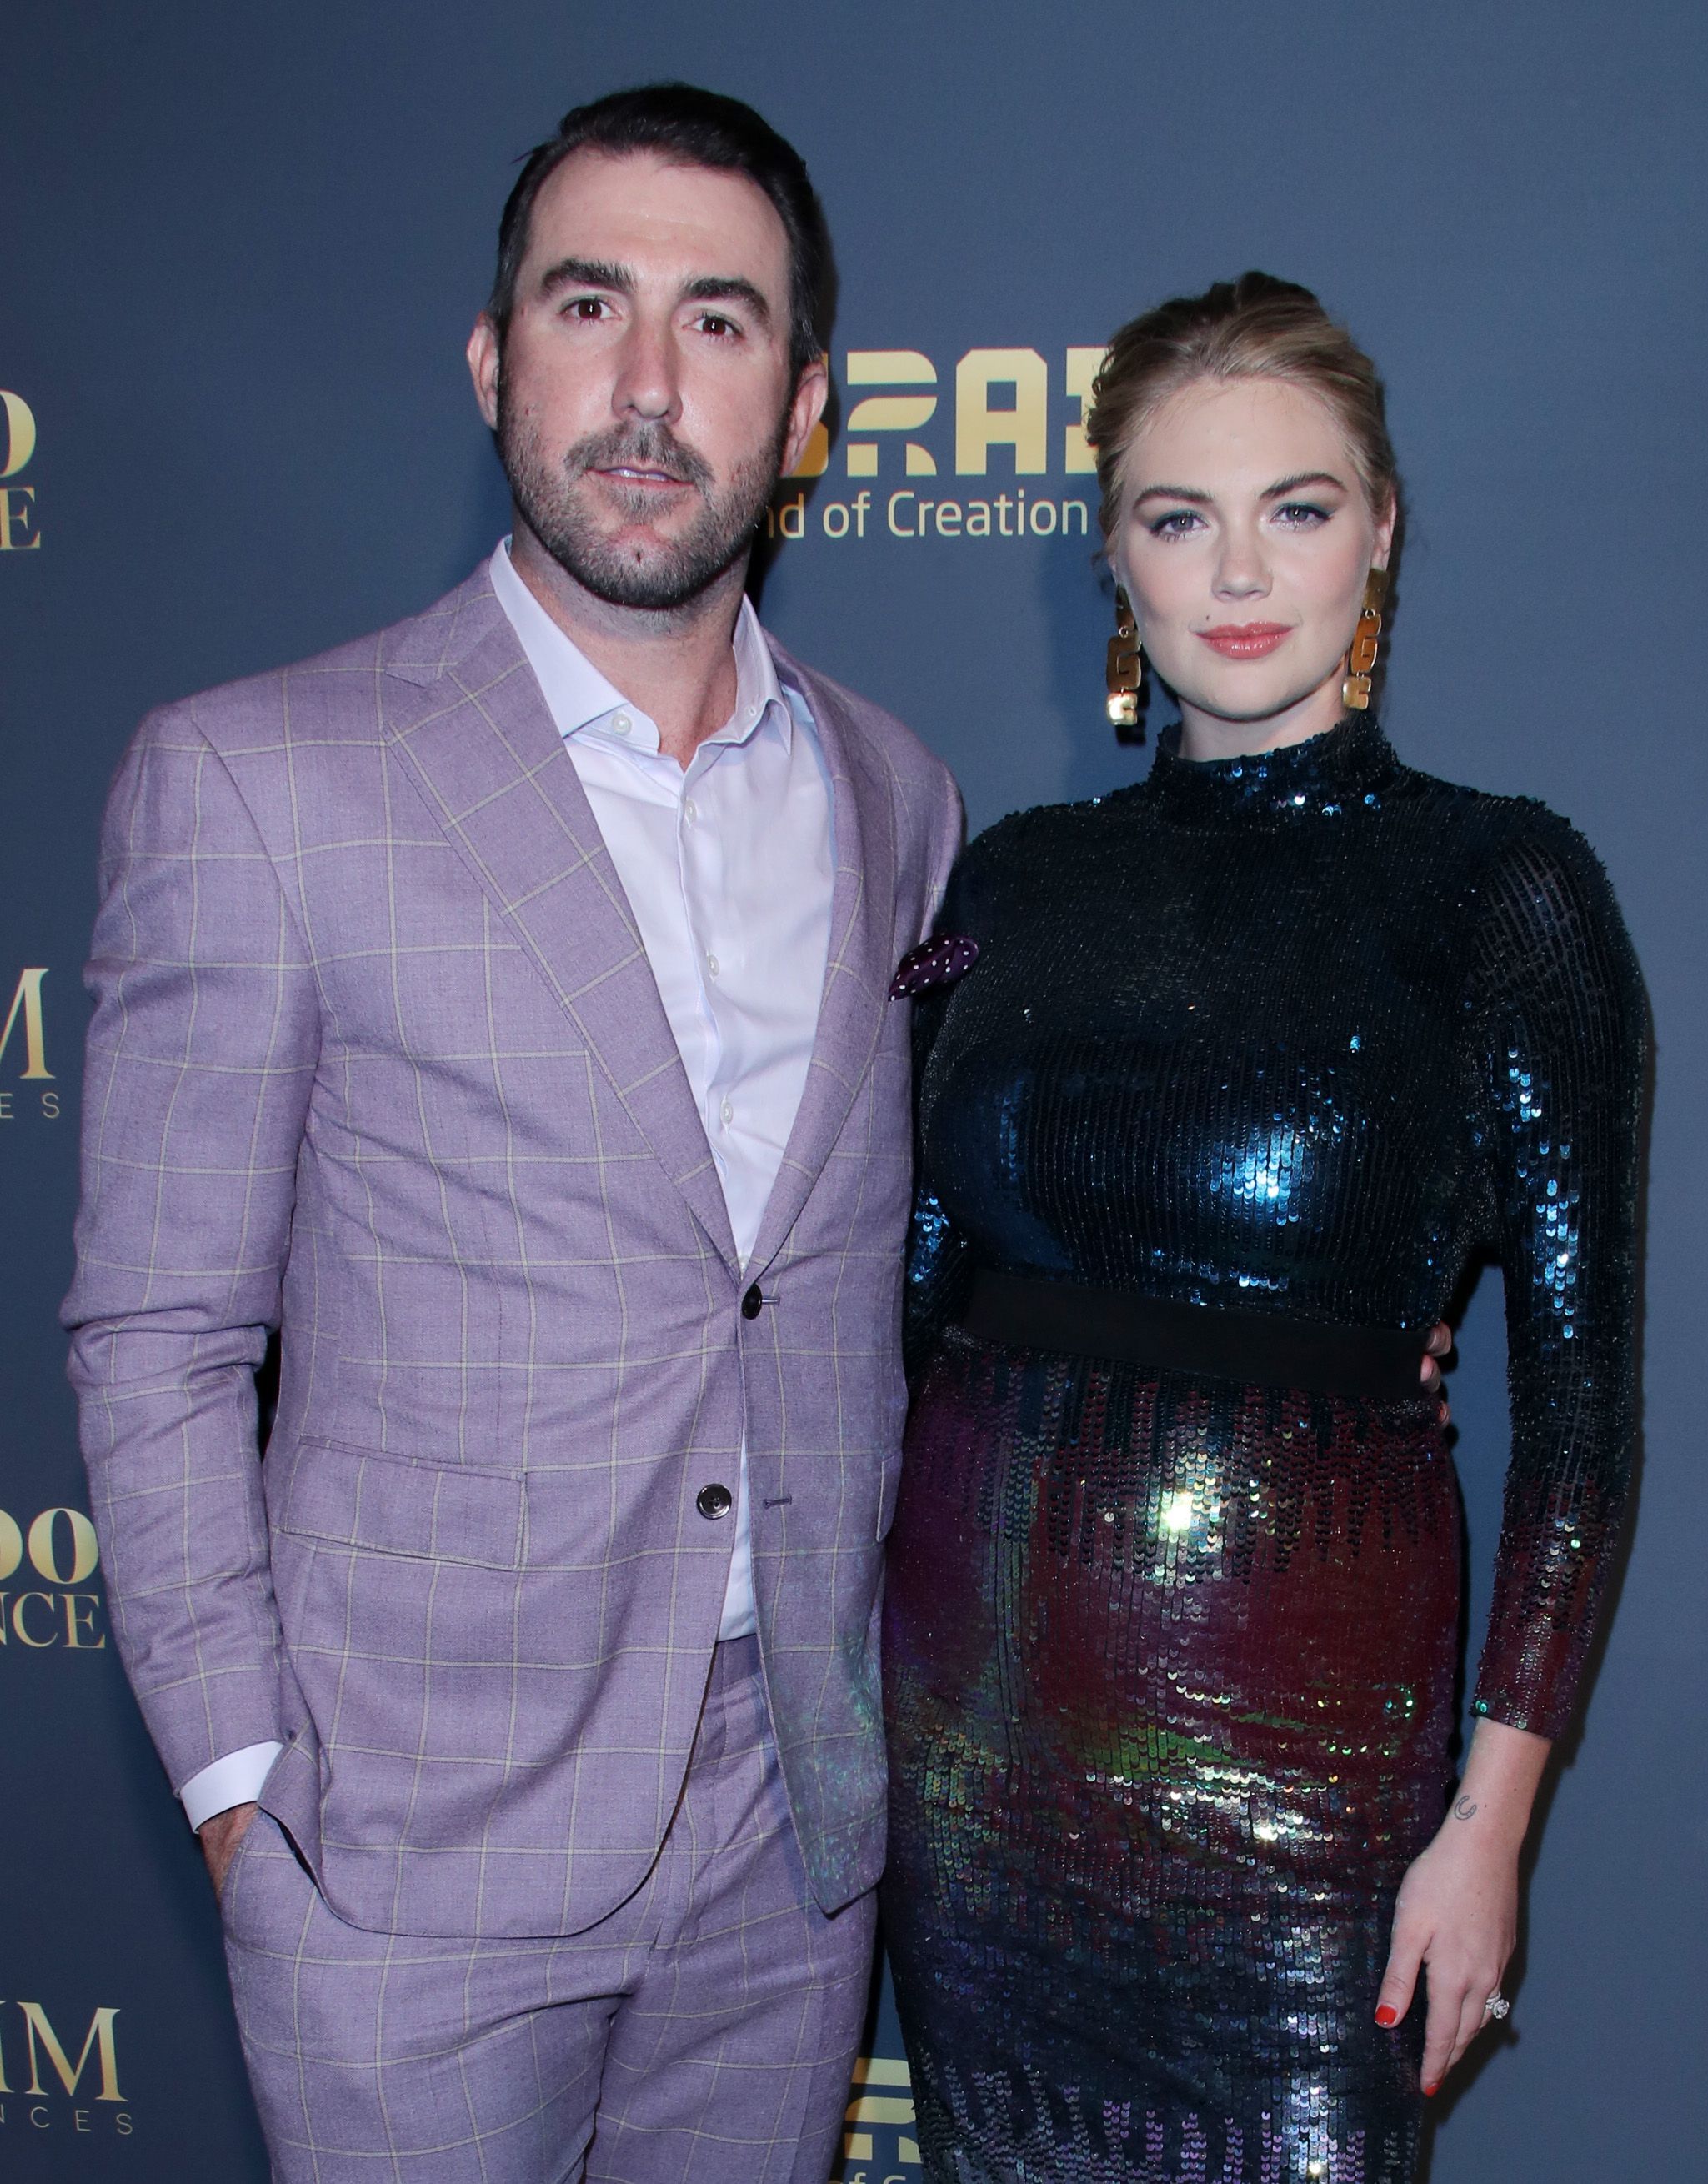 <p><a href="https://www.wonderwall.com/celebrity/profiles/overview/kate-upton-1526.article">Kate Upton</a> and Justin Verlander tied the knot in 2017 and welcomed their first child in 2019. The model is nine years younger than her baseball player husband, whom she wed at 25.</p>